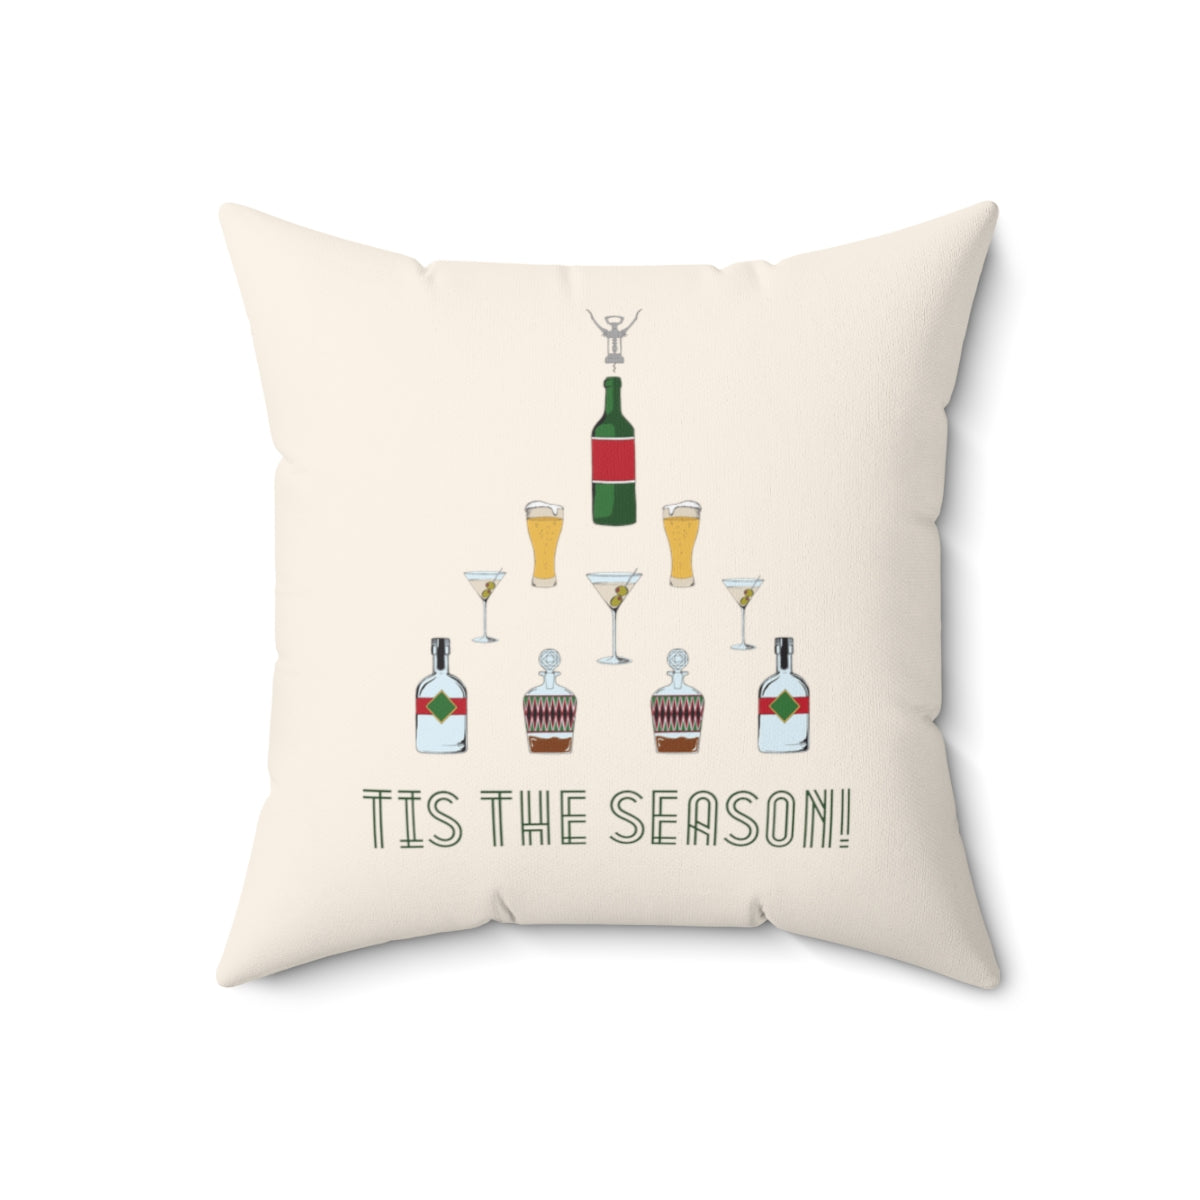 Tis the Season for Booze | Snarky Holiday Pillow | 4 sizes